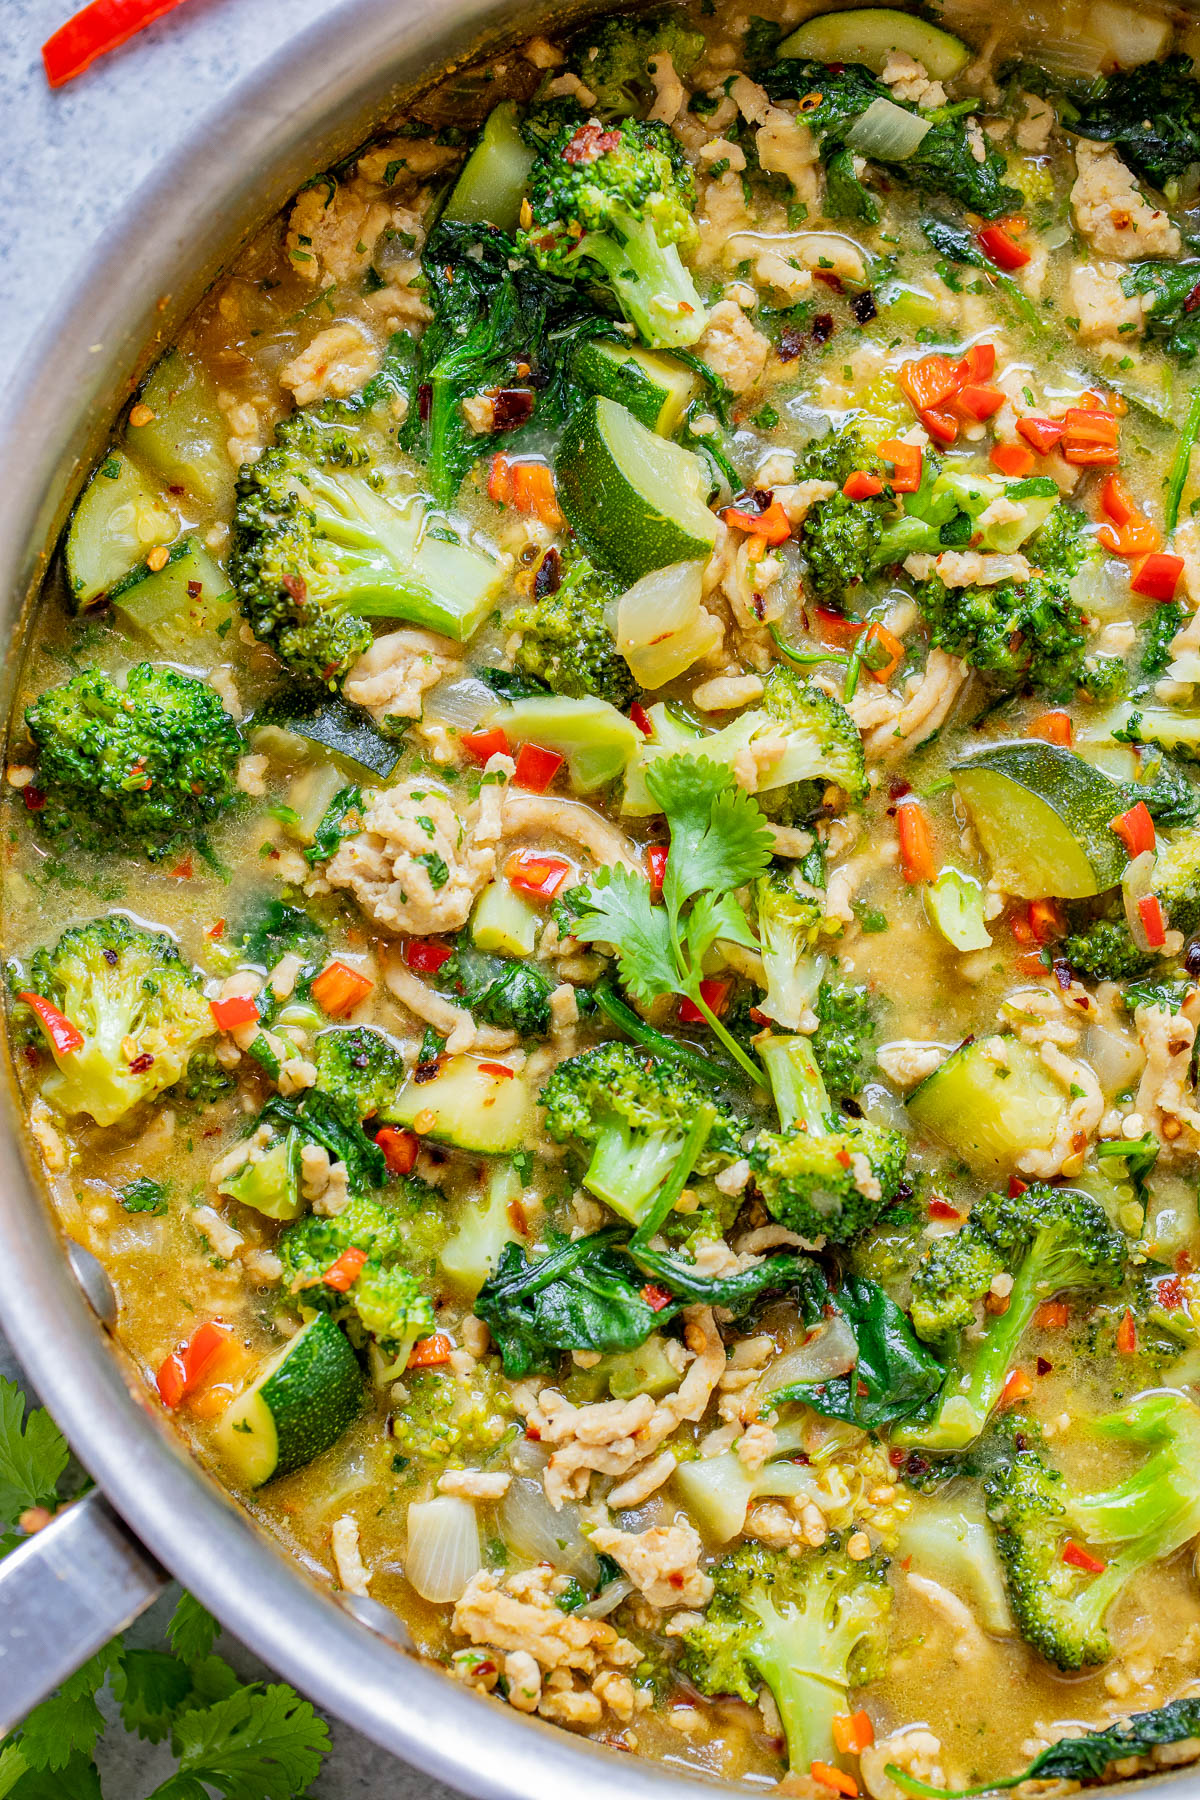 A green chicken and broccoli curry with herbs and spices.